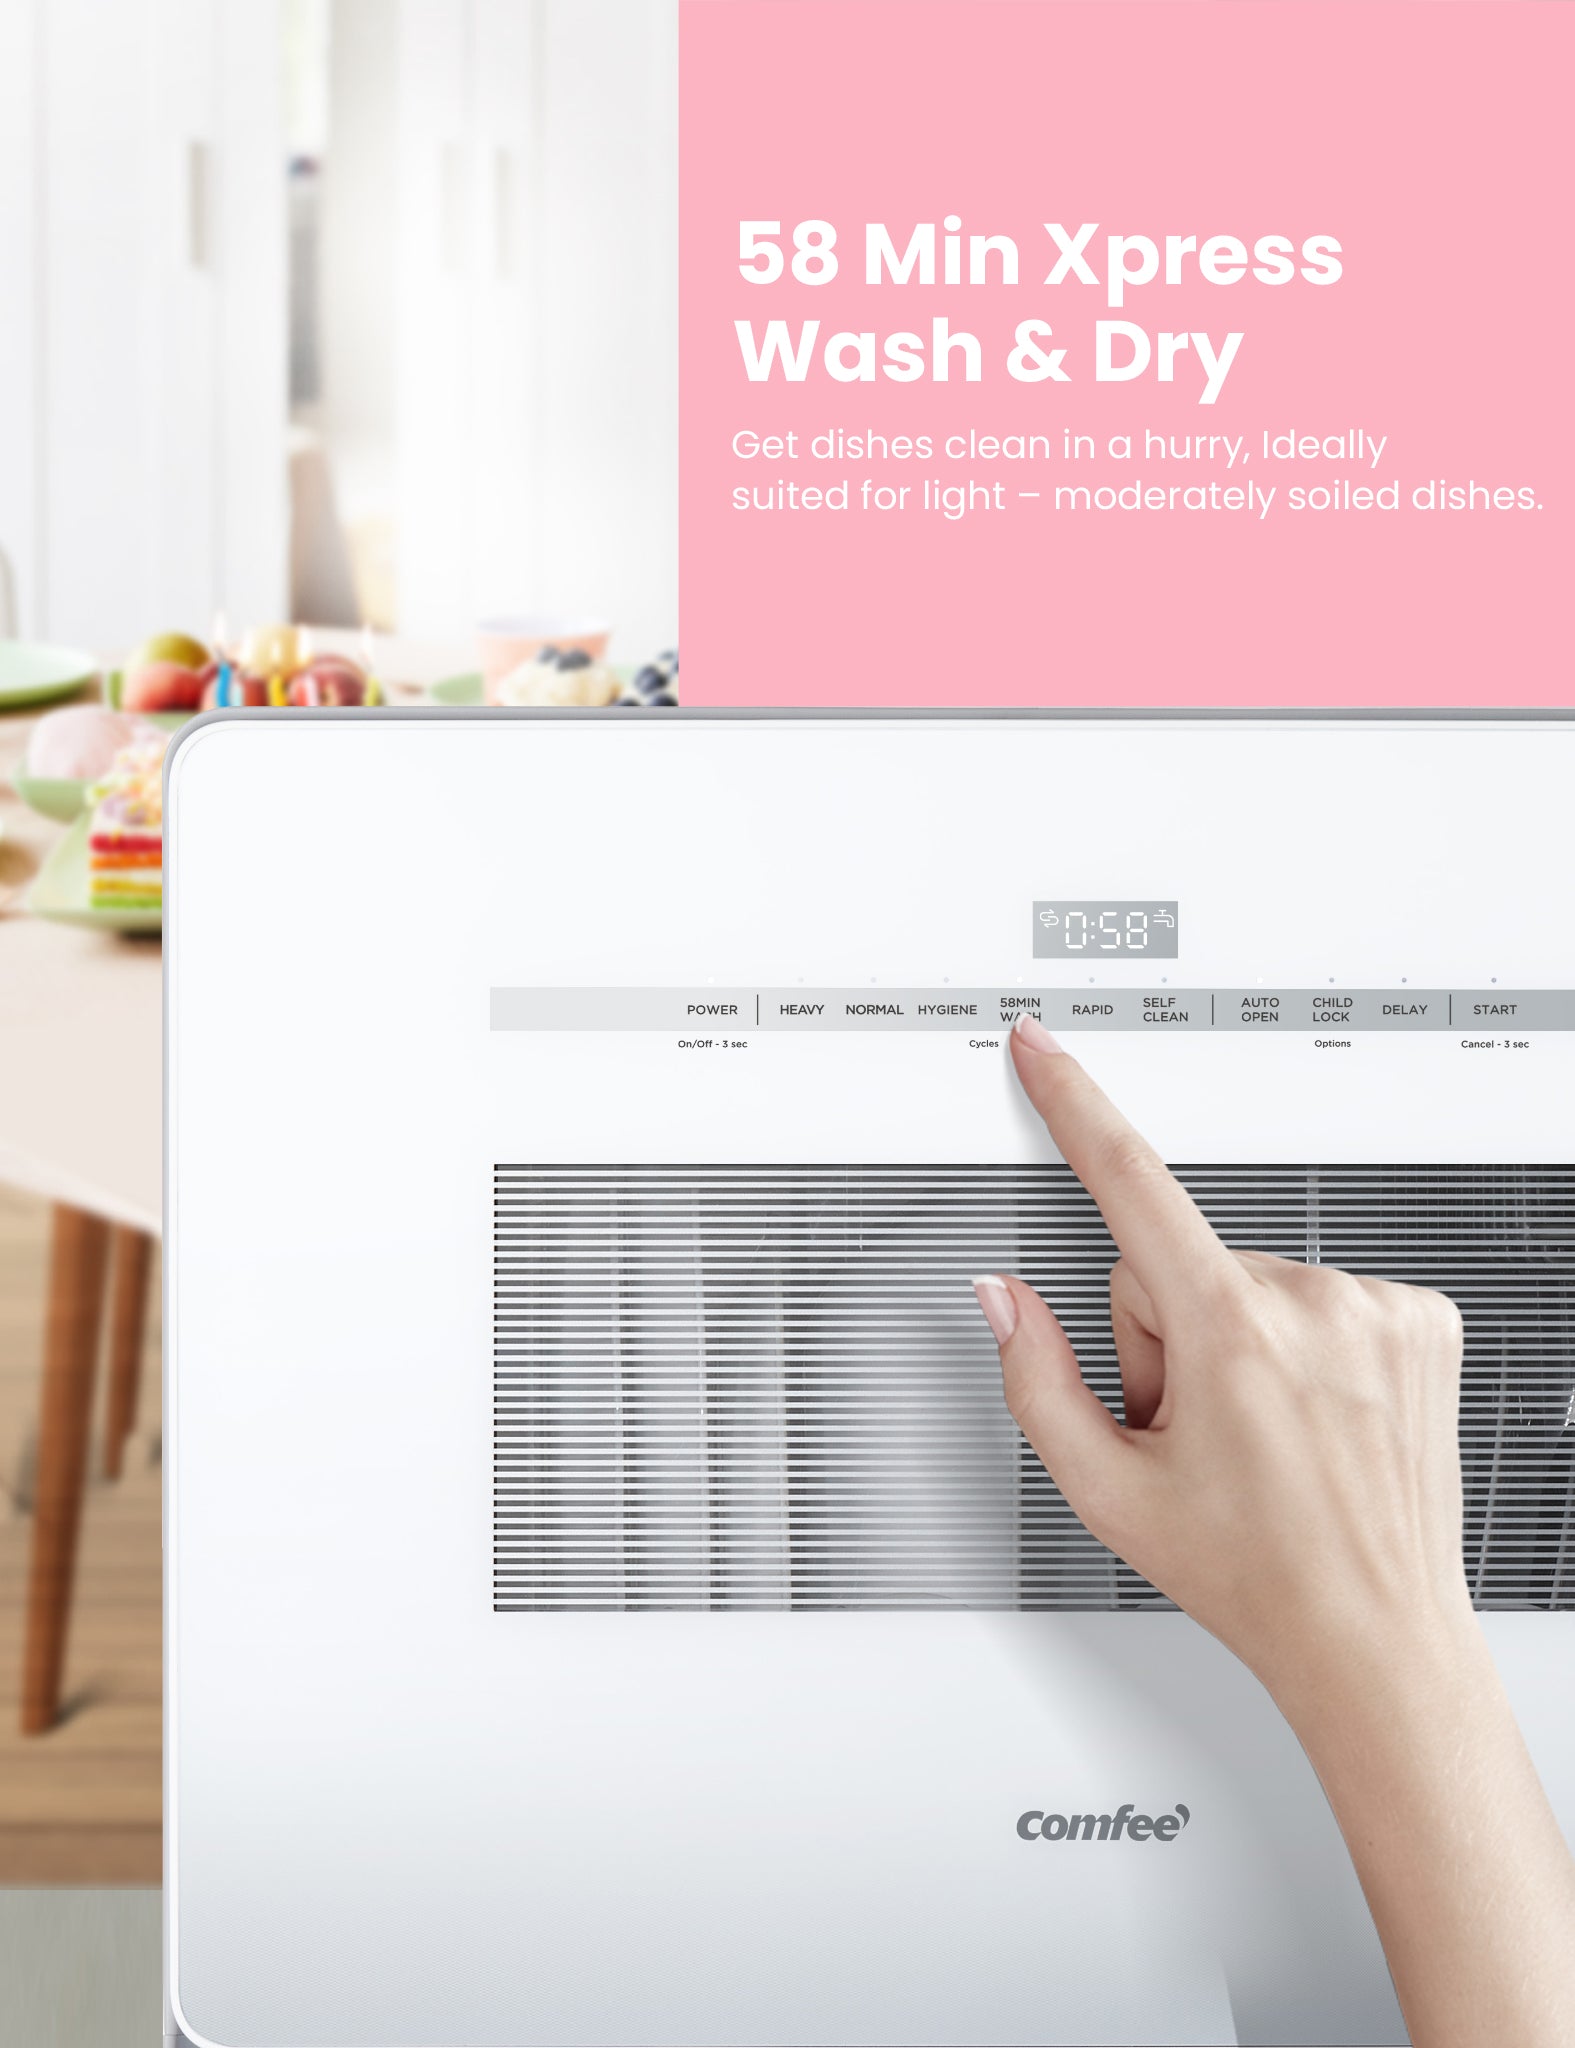 one touch easy control of comfee countertop dishwasher